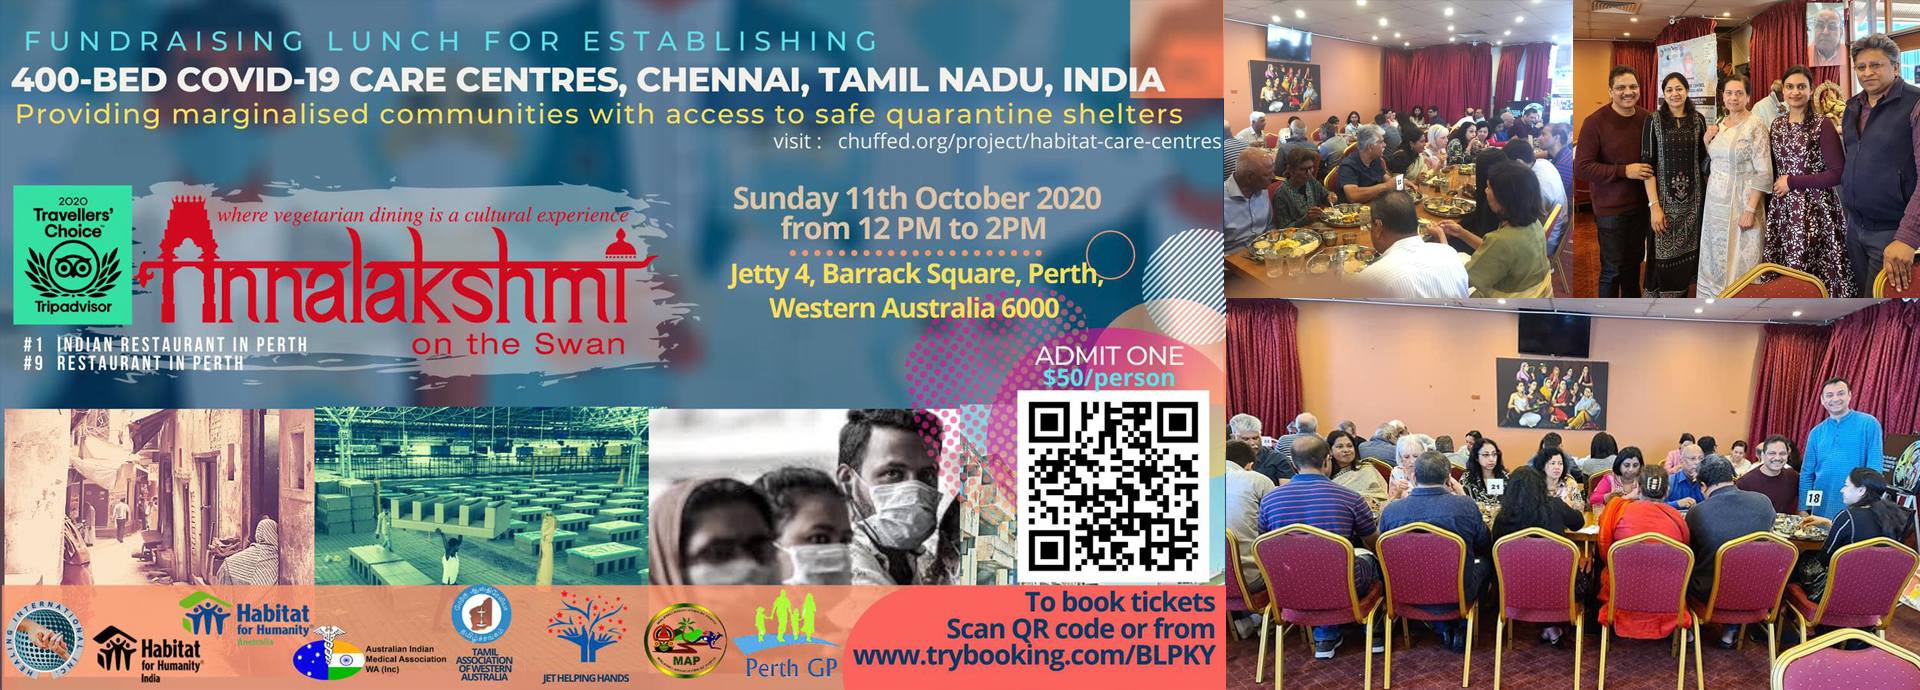 Fundraising Lunch for establishing 400- Bed COVID-19 Care Centres, Chennai, Tamil Nadu, India